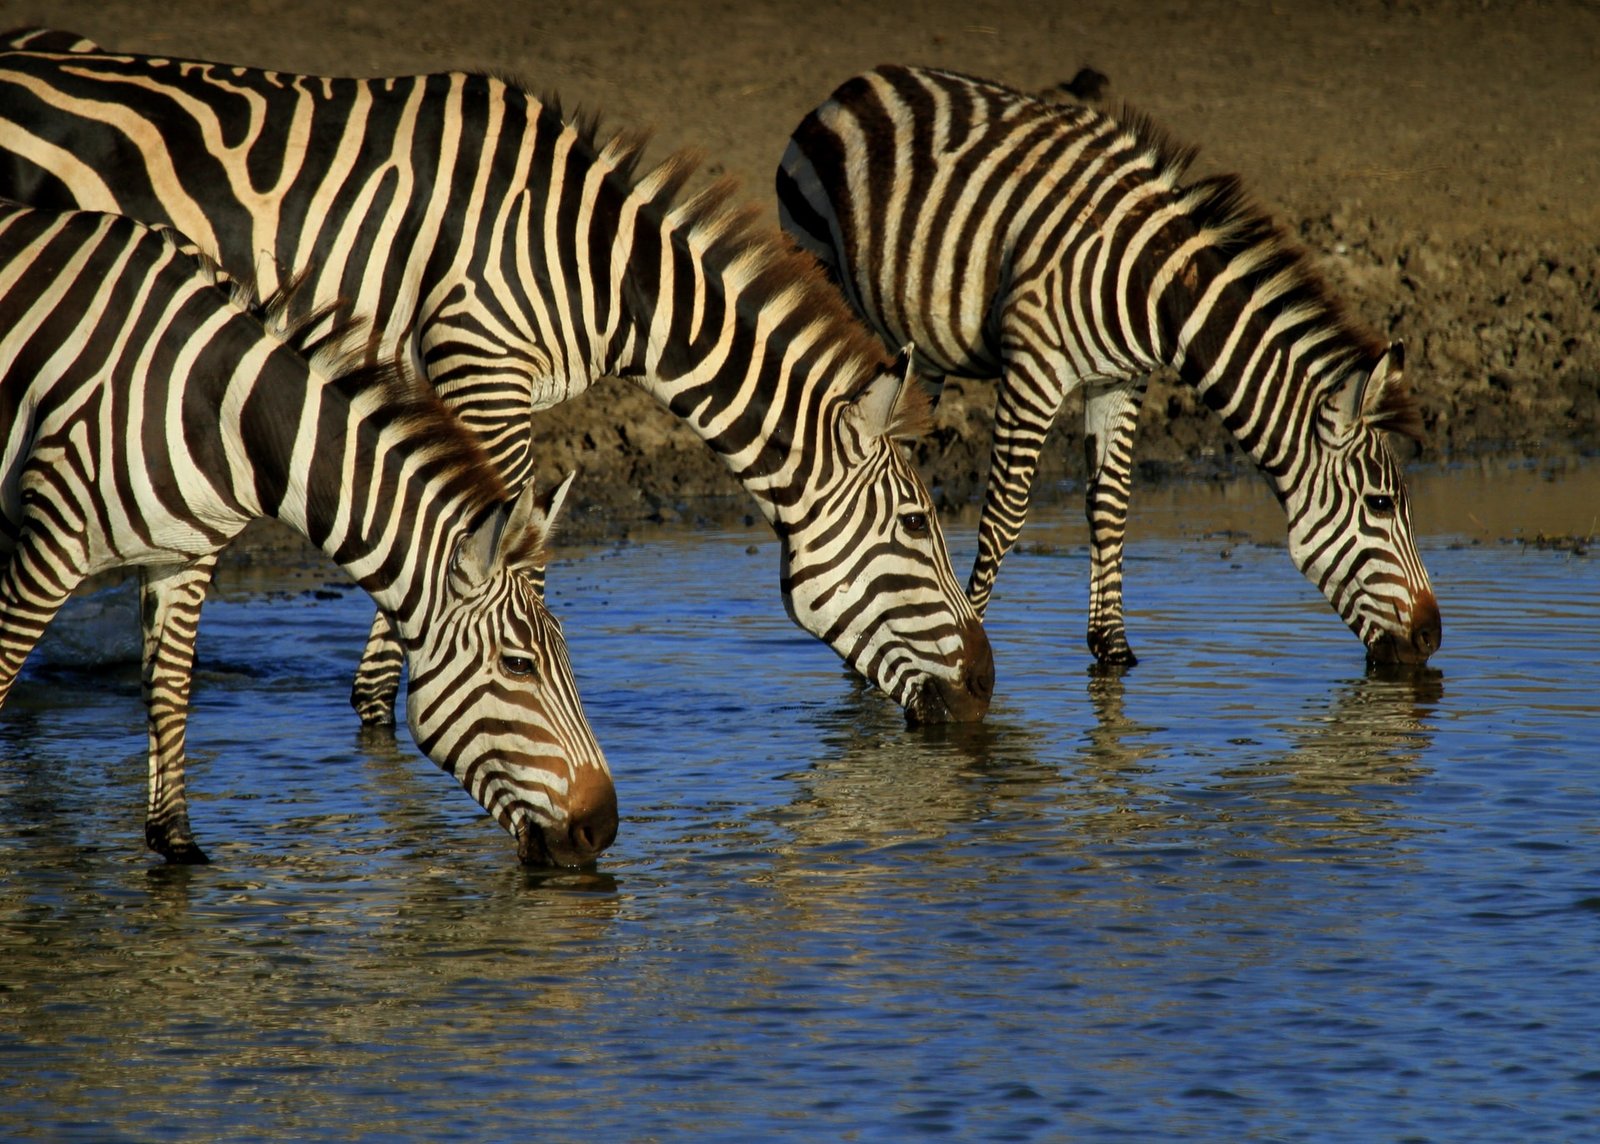 Zebras Drinking Water on River